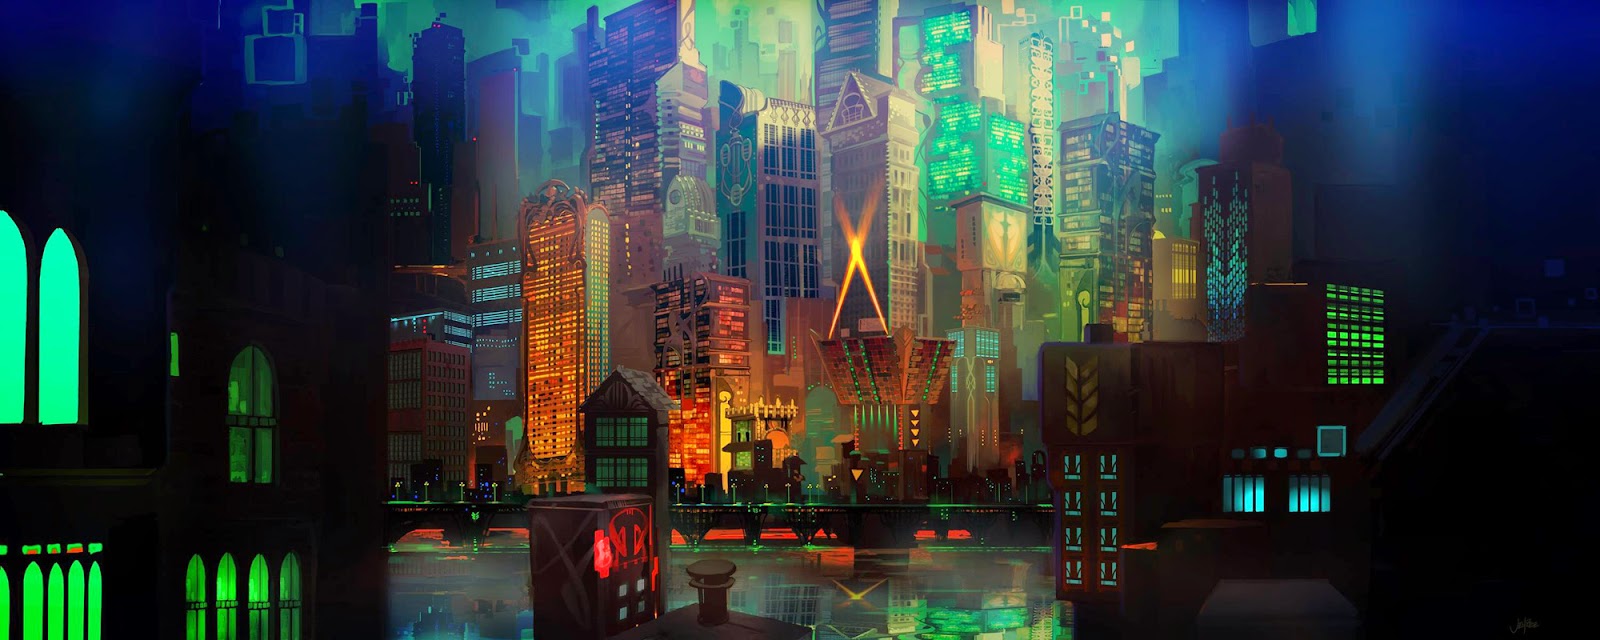 transistor_environment_concept_by_jen_zee_additions_01.jpg